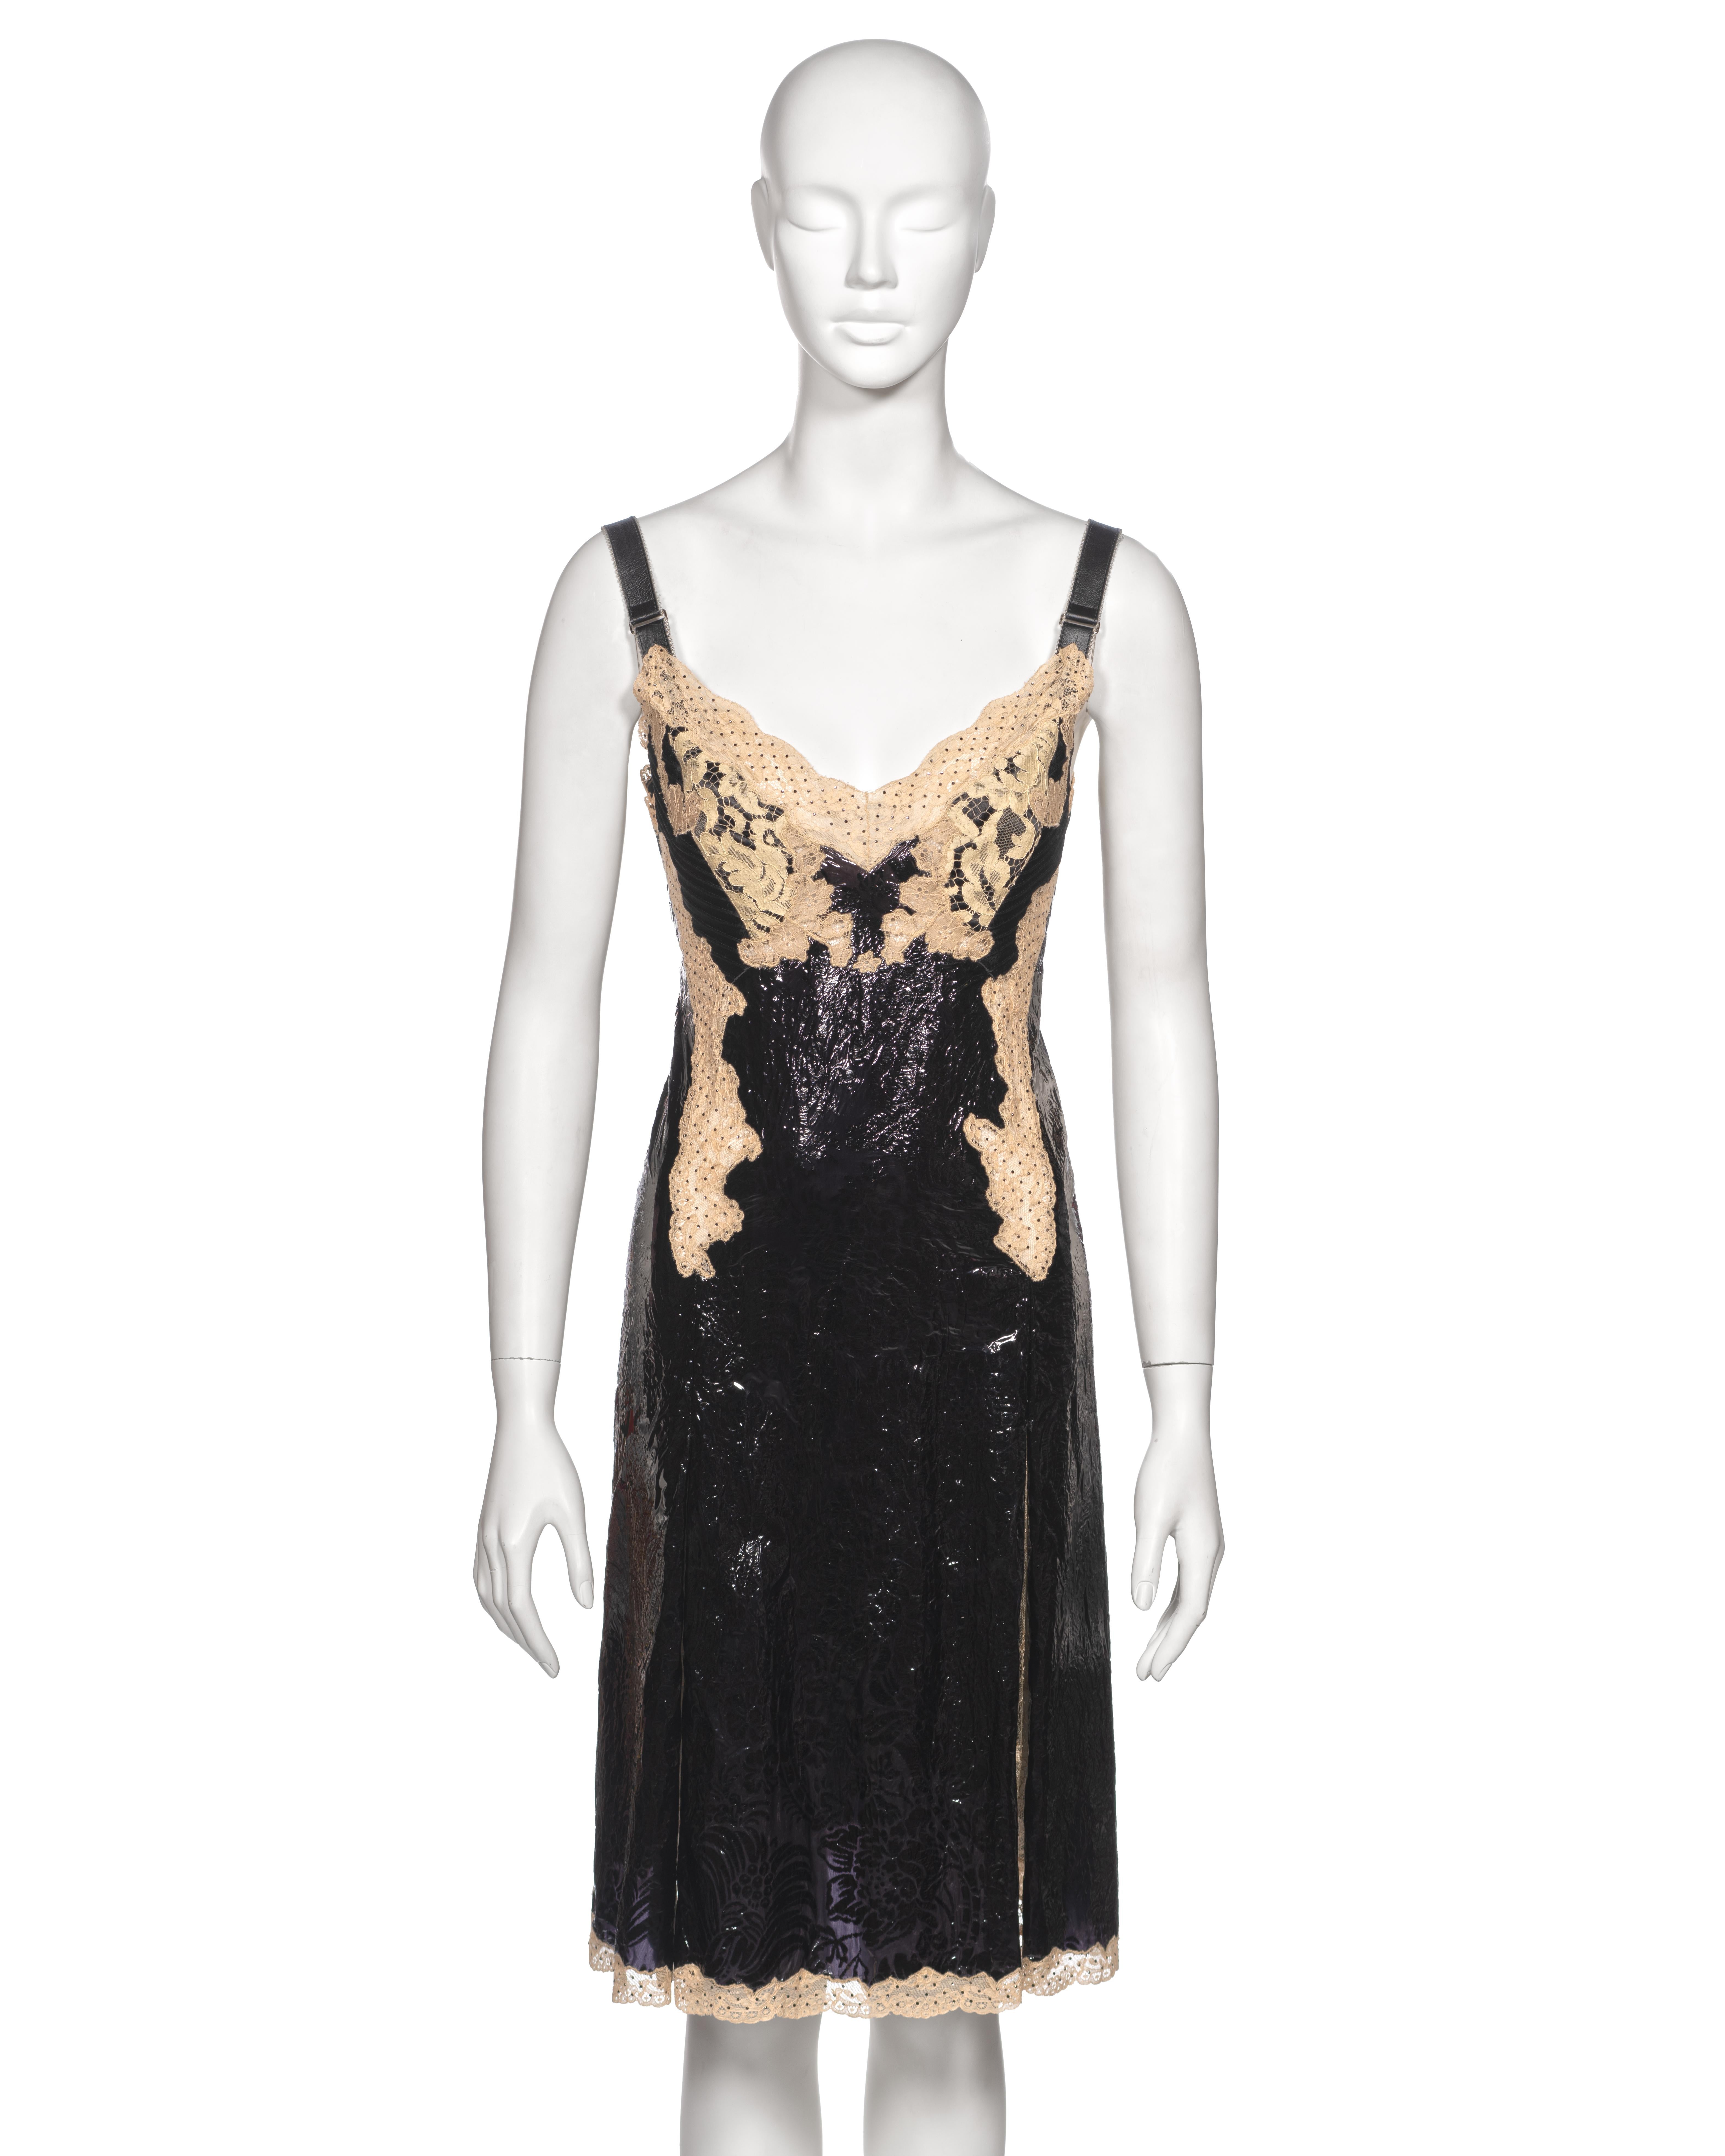 Louis Vuitton by Nicolas Ghesquière Evening Slip Dress Dress with Lace, fw 2017 In Excellent Condition For Sale In London, GB